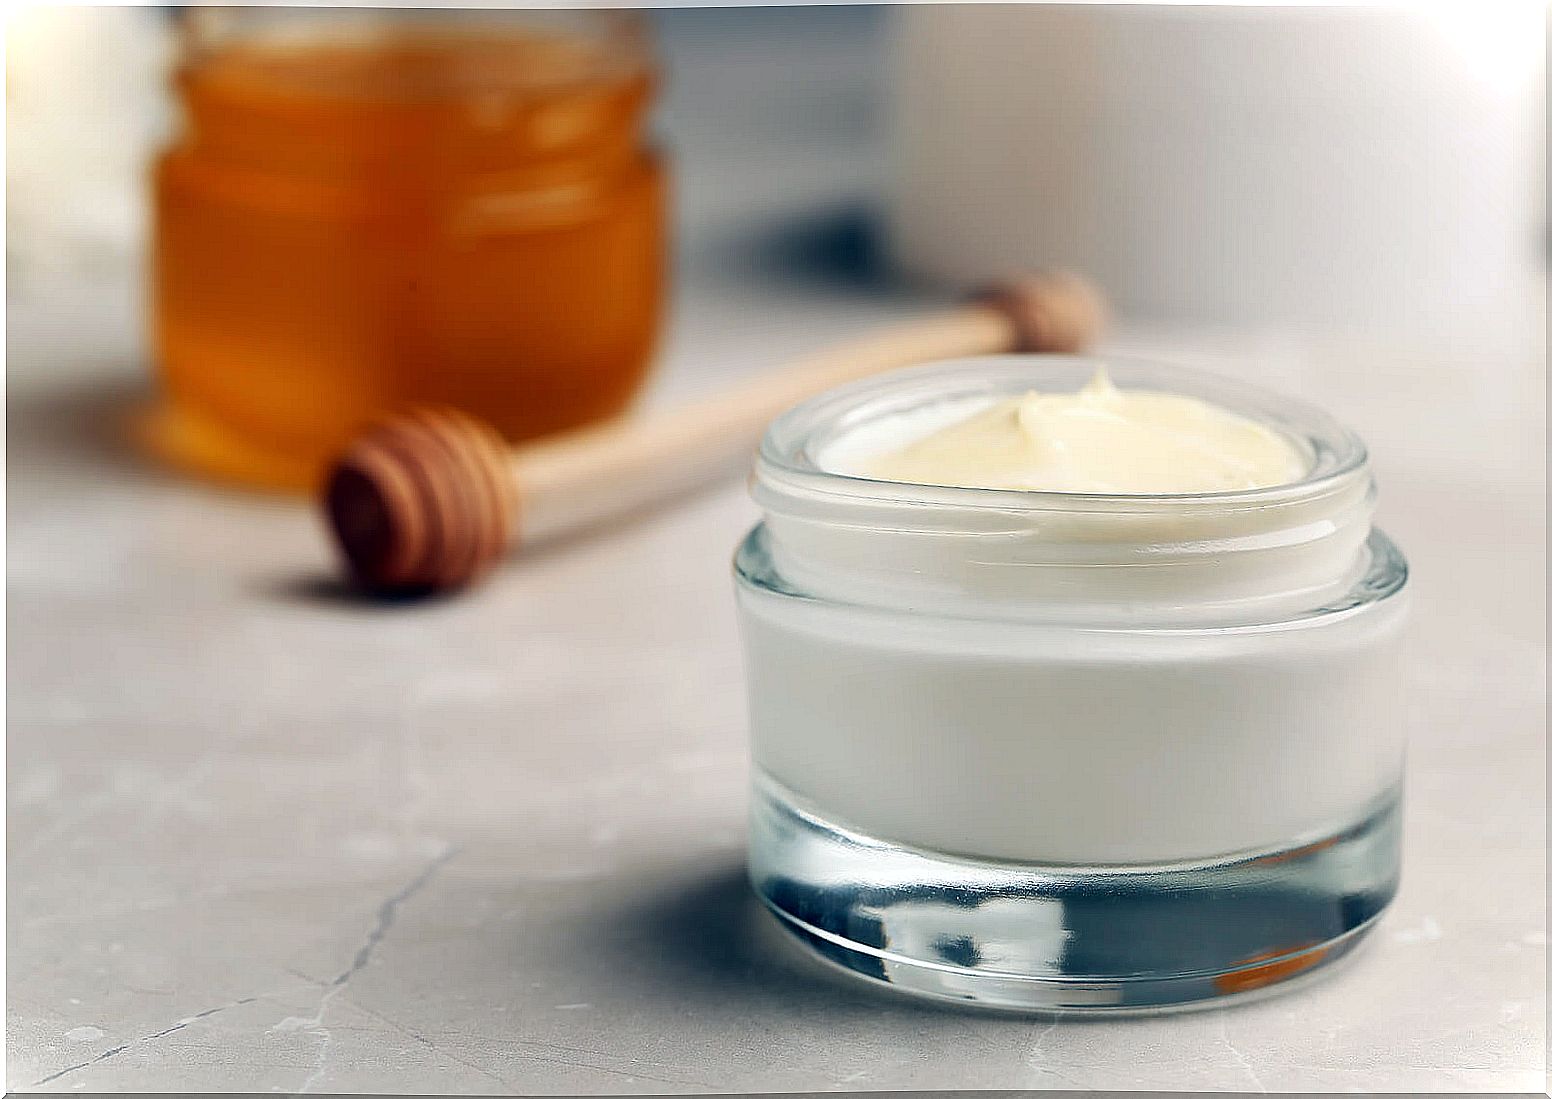 Learn how to make a cream with analgesic and anti-inflammatory properties at home